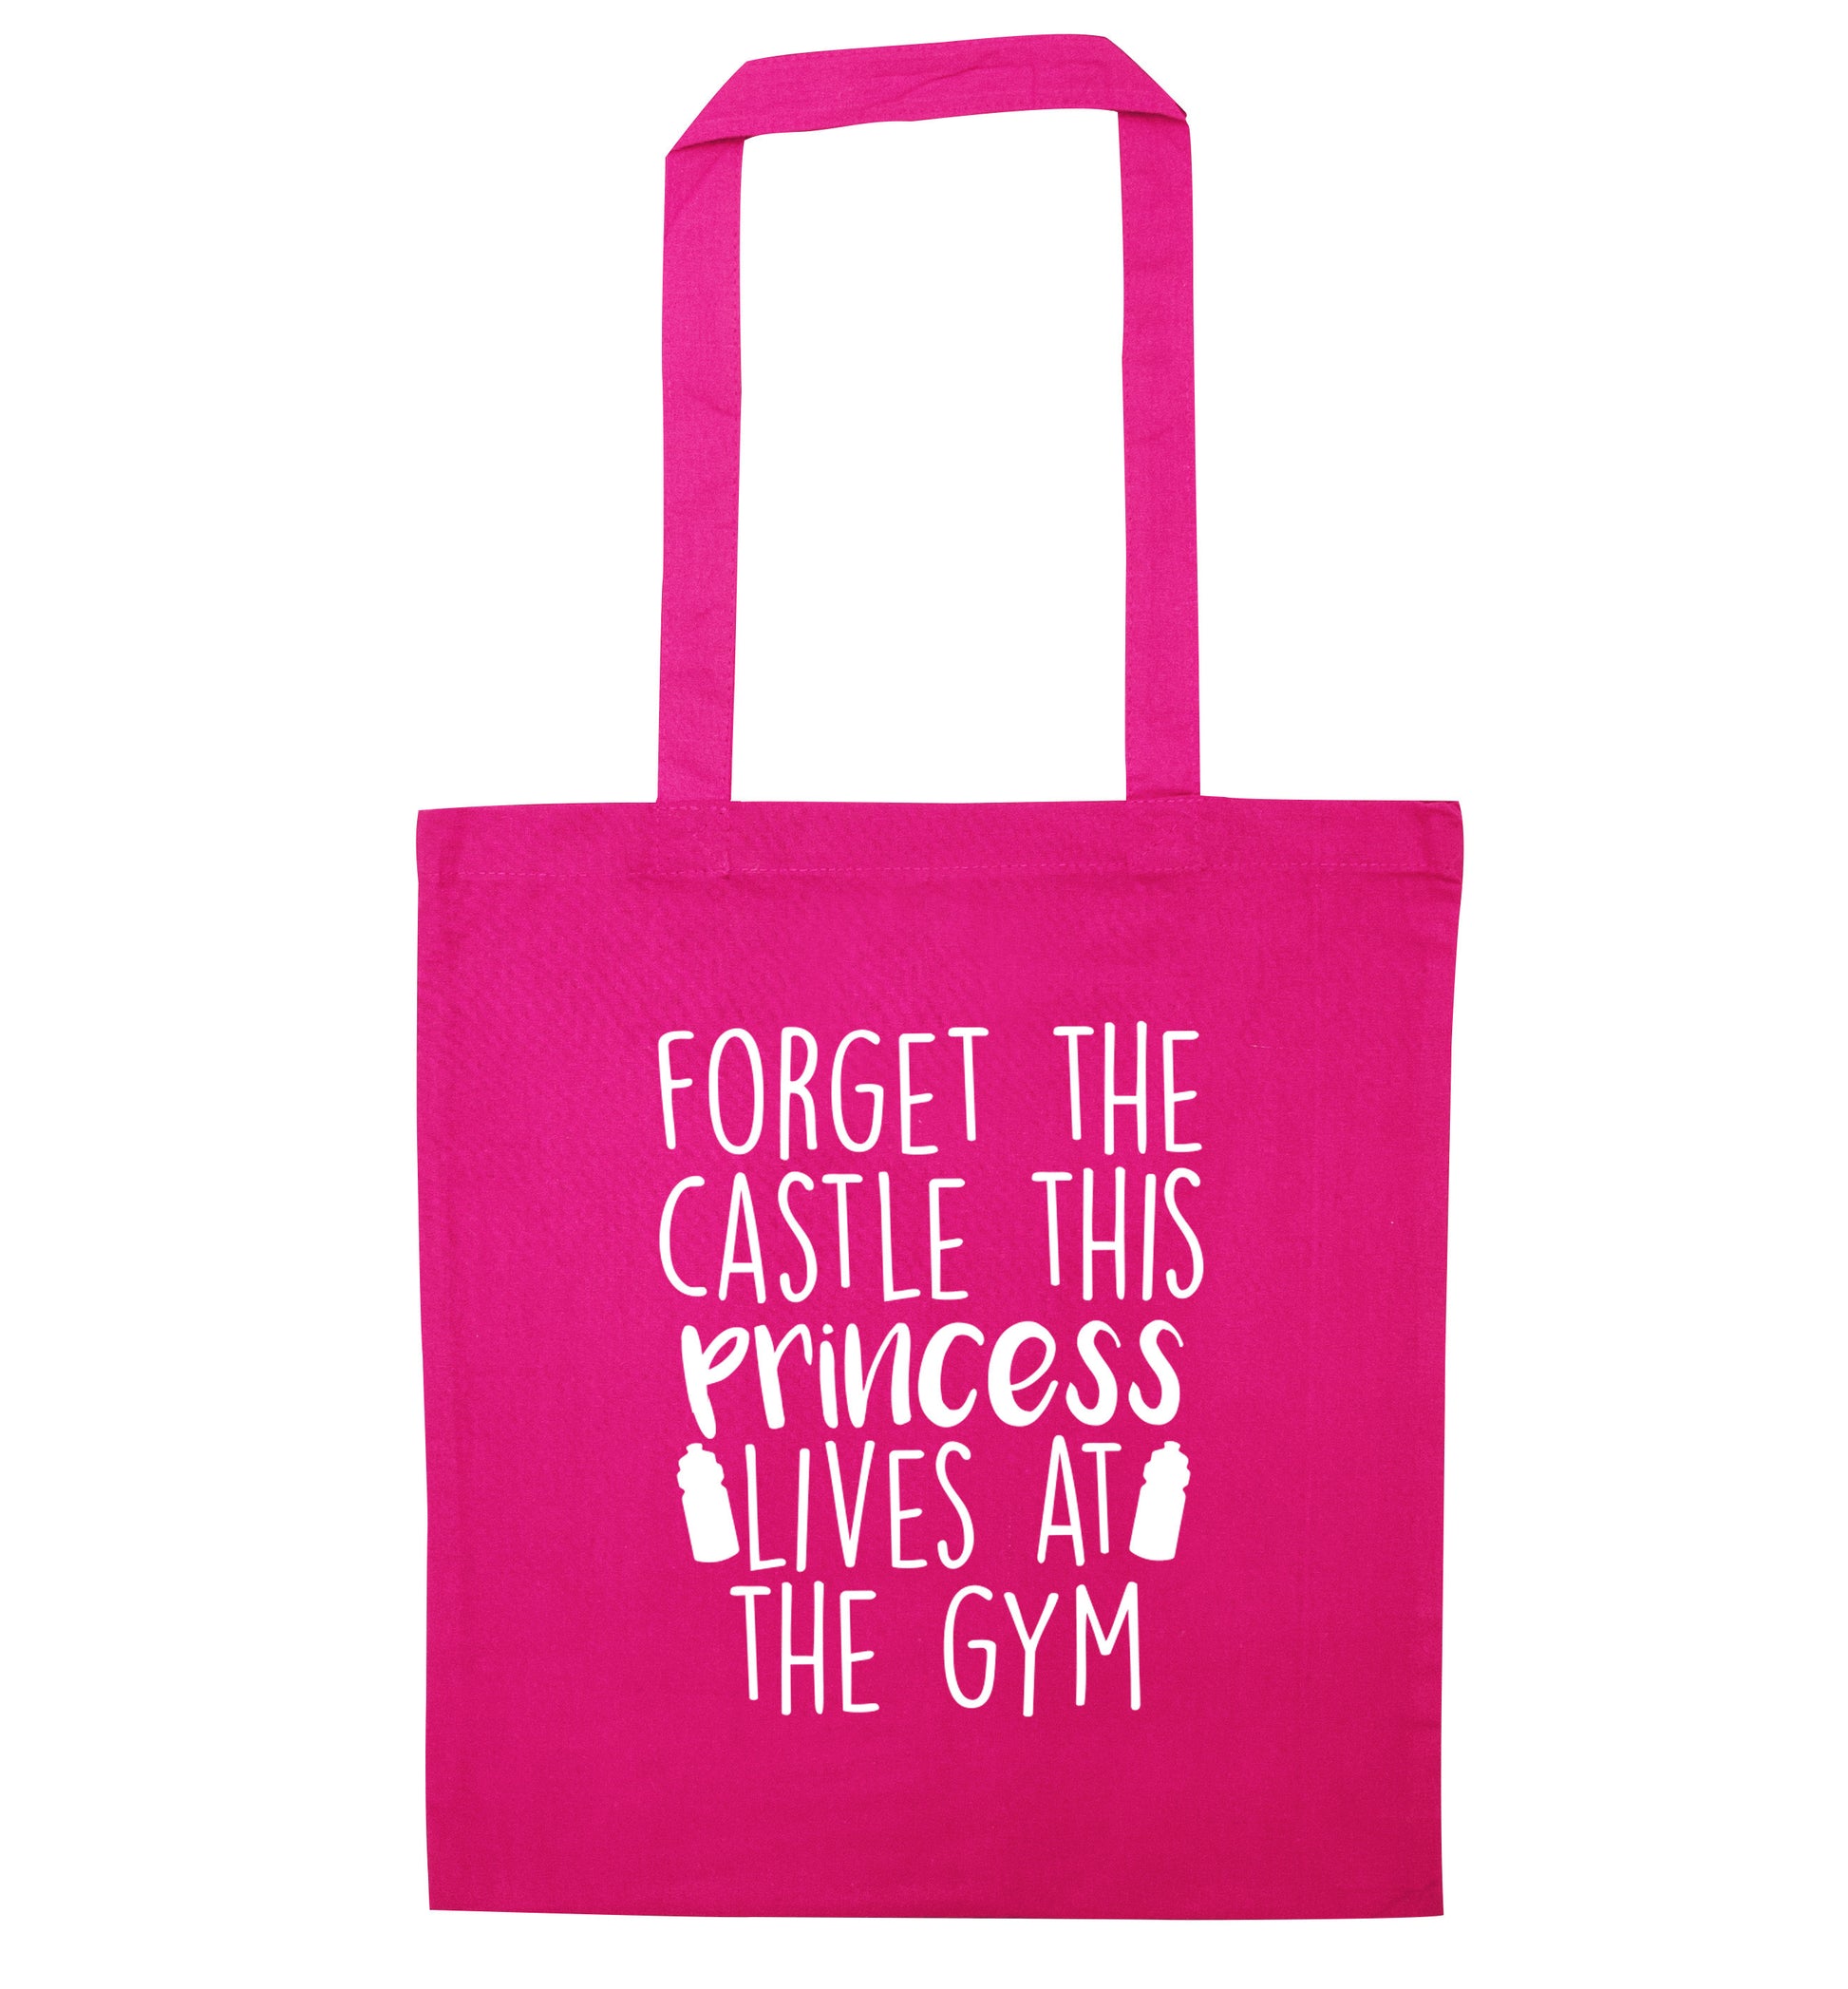 Forget the castle this princess lives at the gym pink tote bag